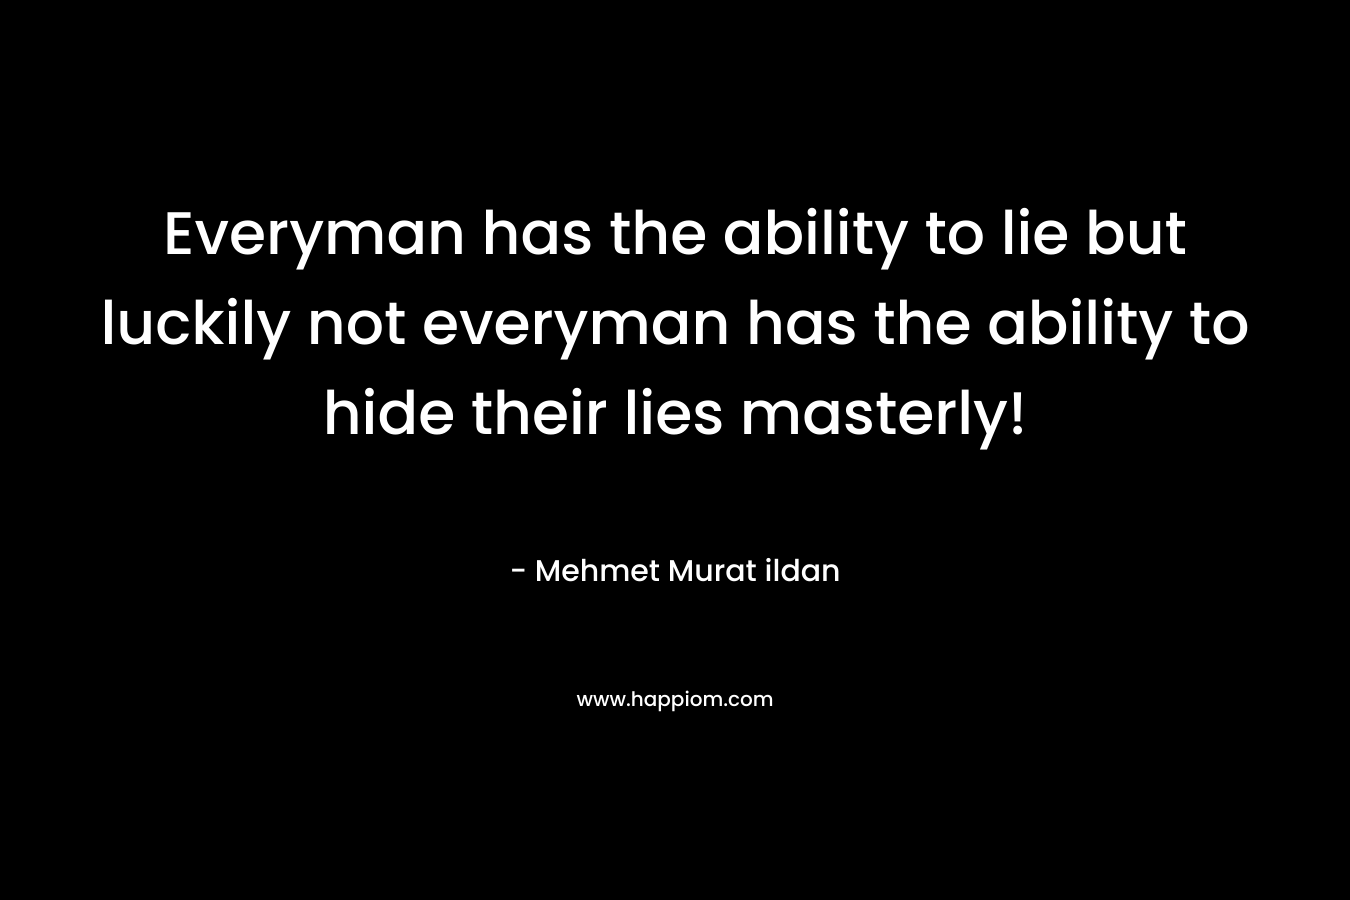 Everyman has the ability to lie but luckily not everyman has the ability to hide their lies masterly!